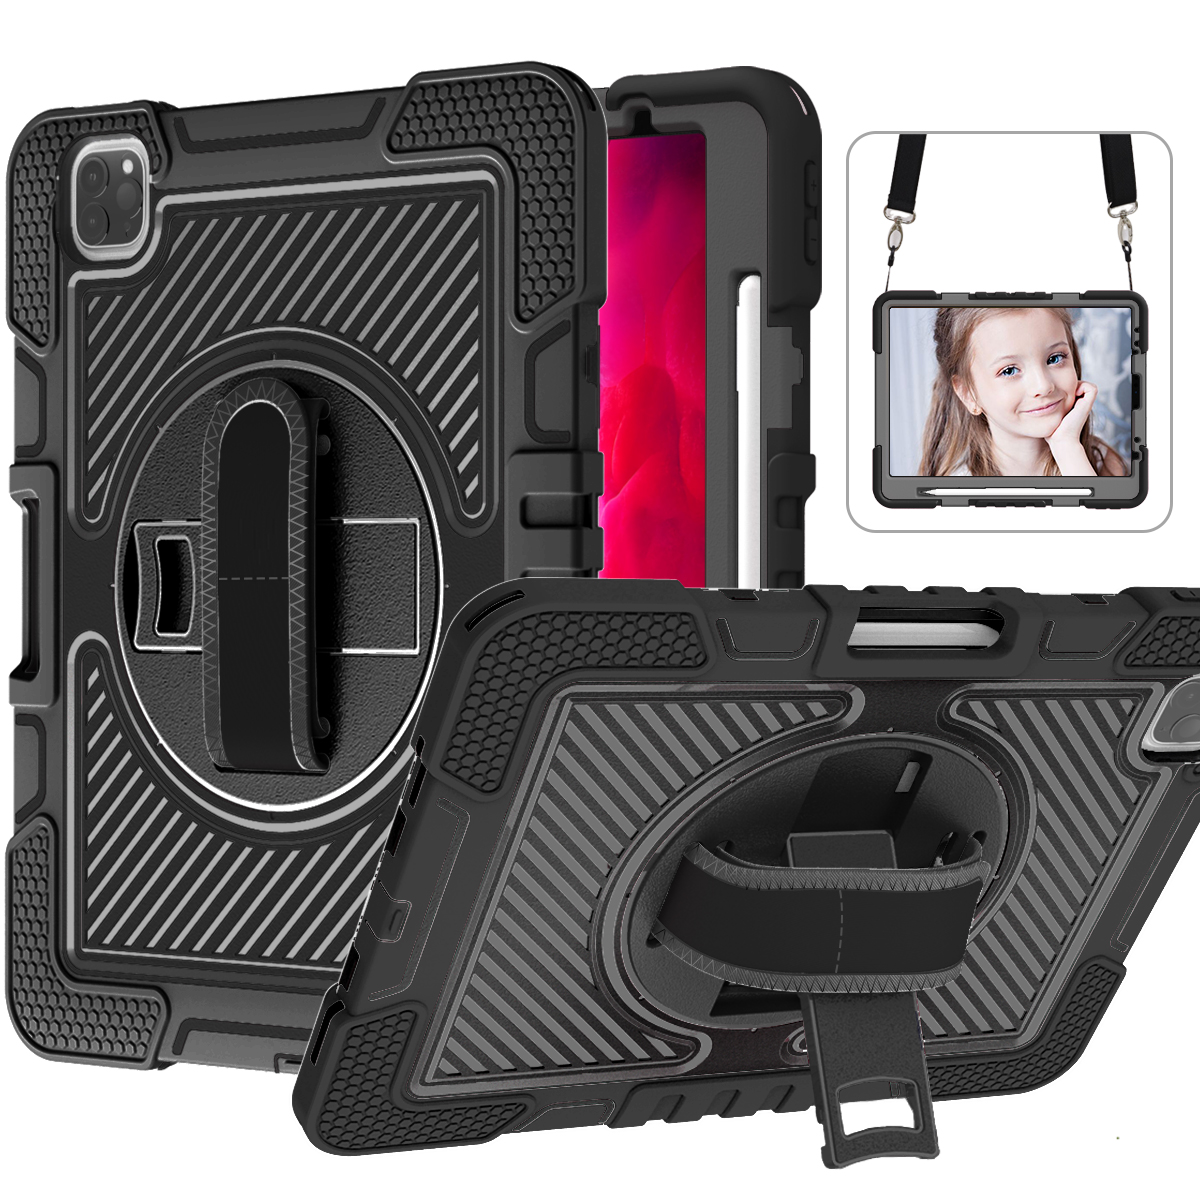 3 Layer Heavy Duty Hybrid Drop Protection Case with 360 Rotating Stand Hand Strap Shoulder